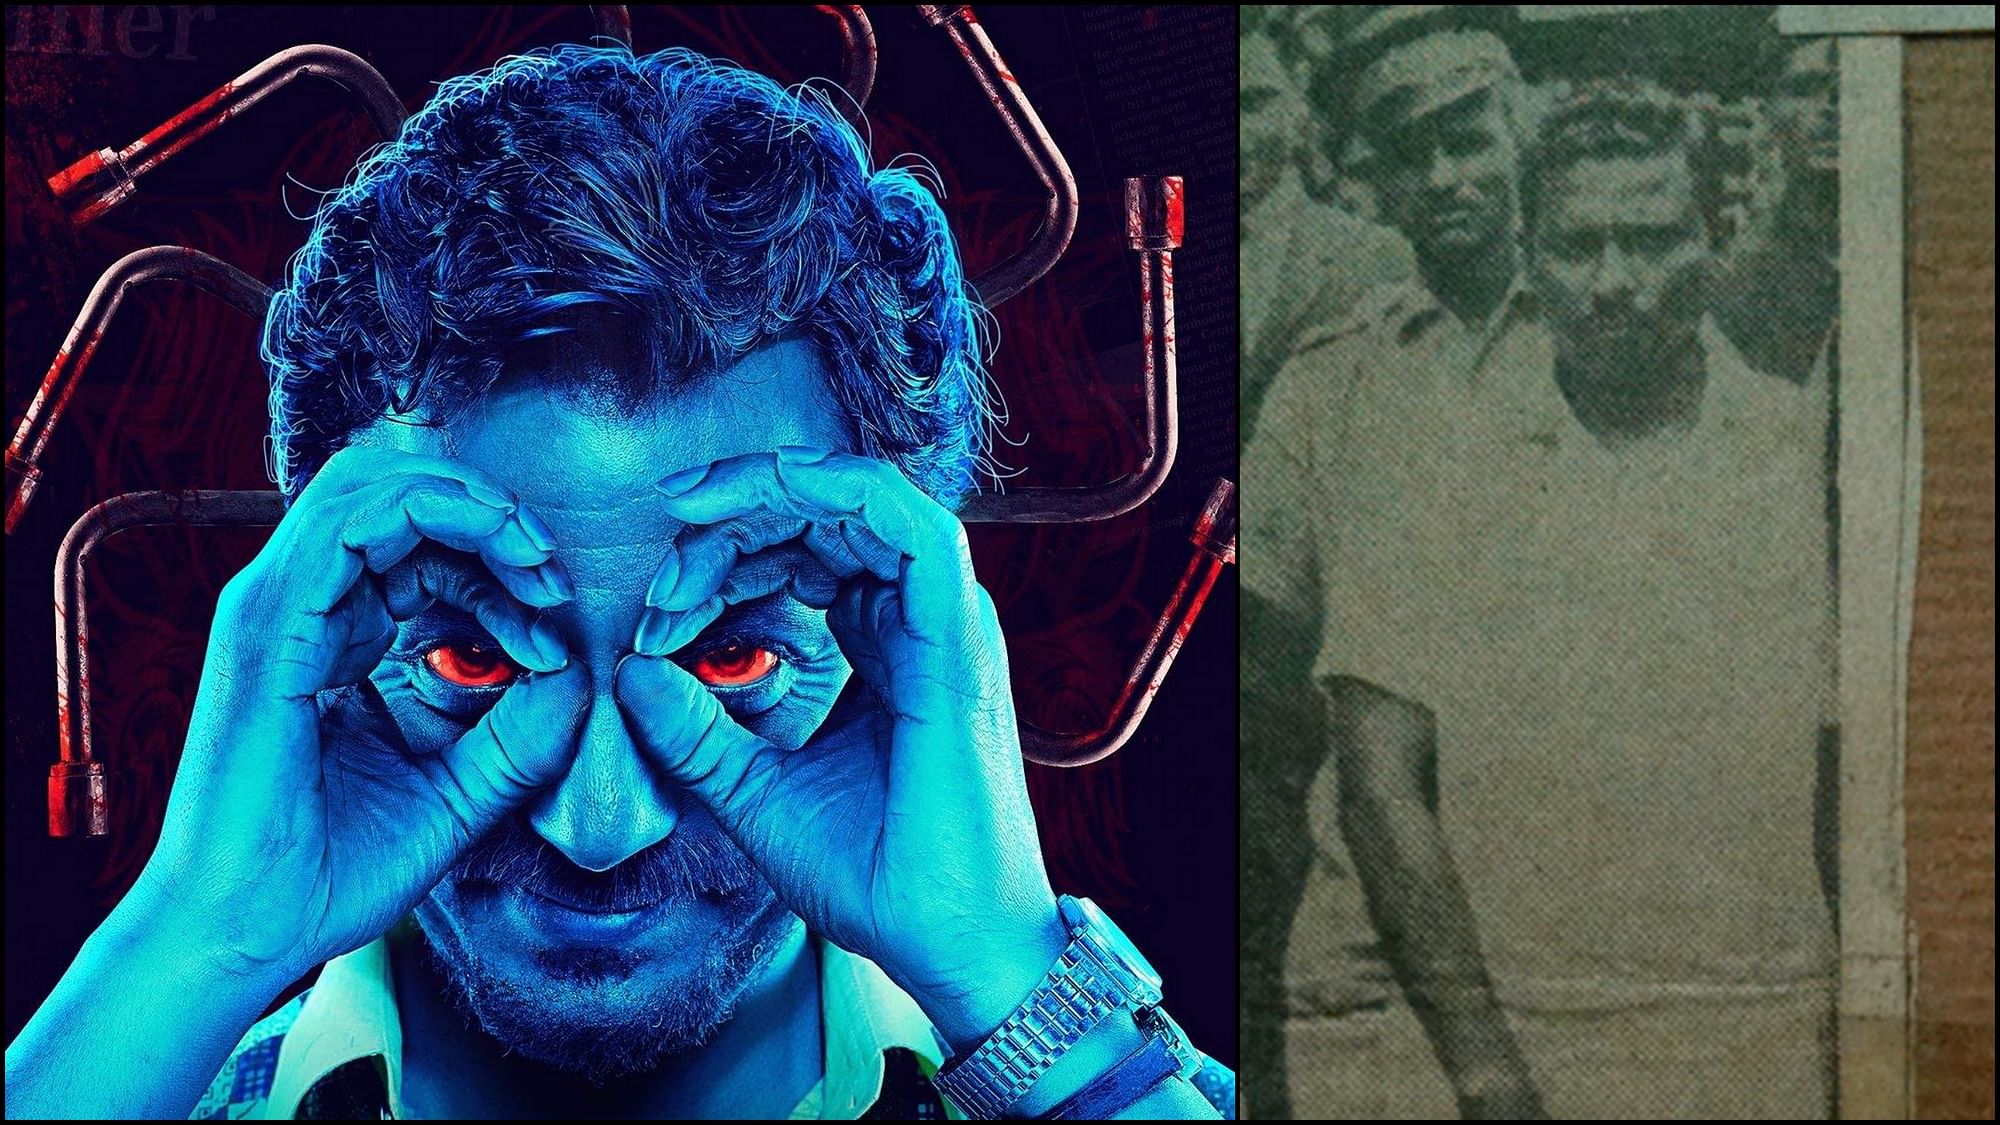 Anurag Kashyap’s latest release plays off a psychopathic serial killer versus Mumbai super cop. (Photo Courtesy: Poster for Raman Raghav)